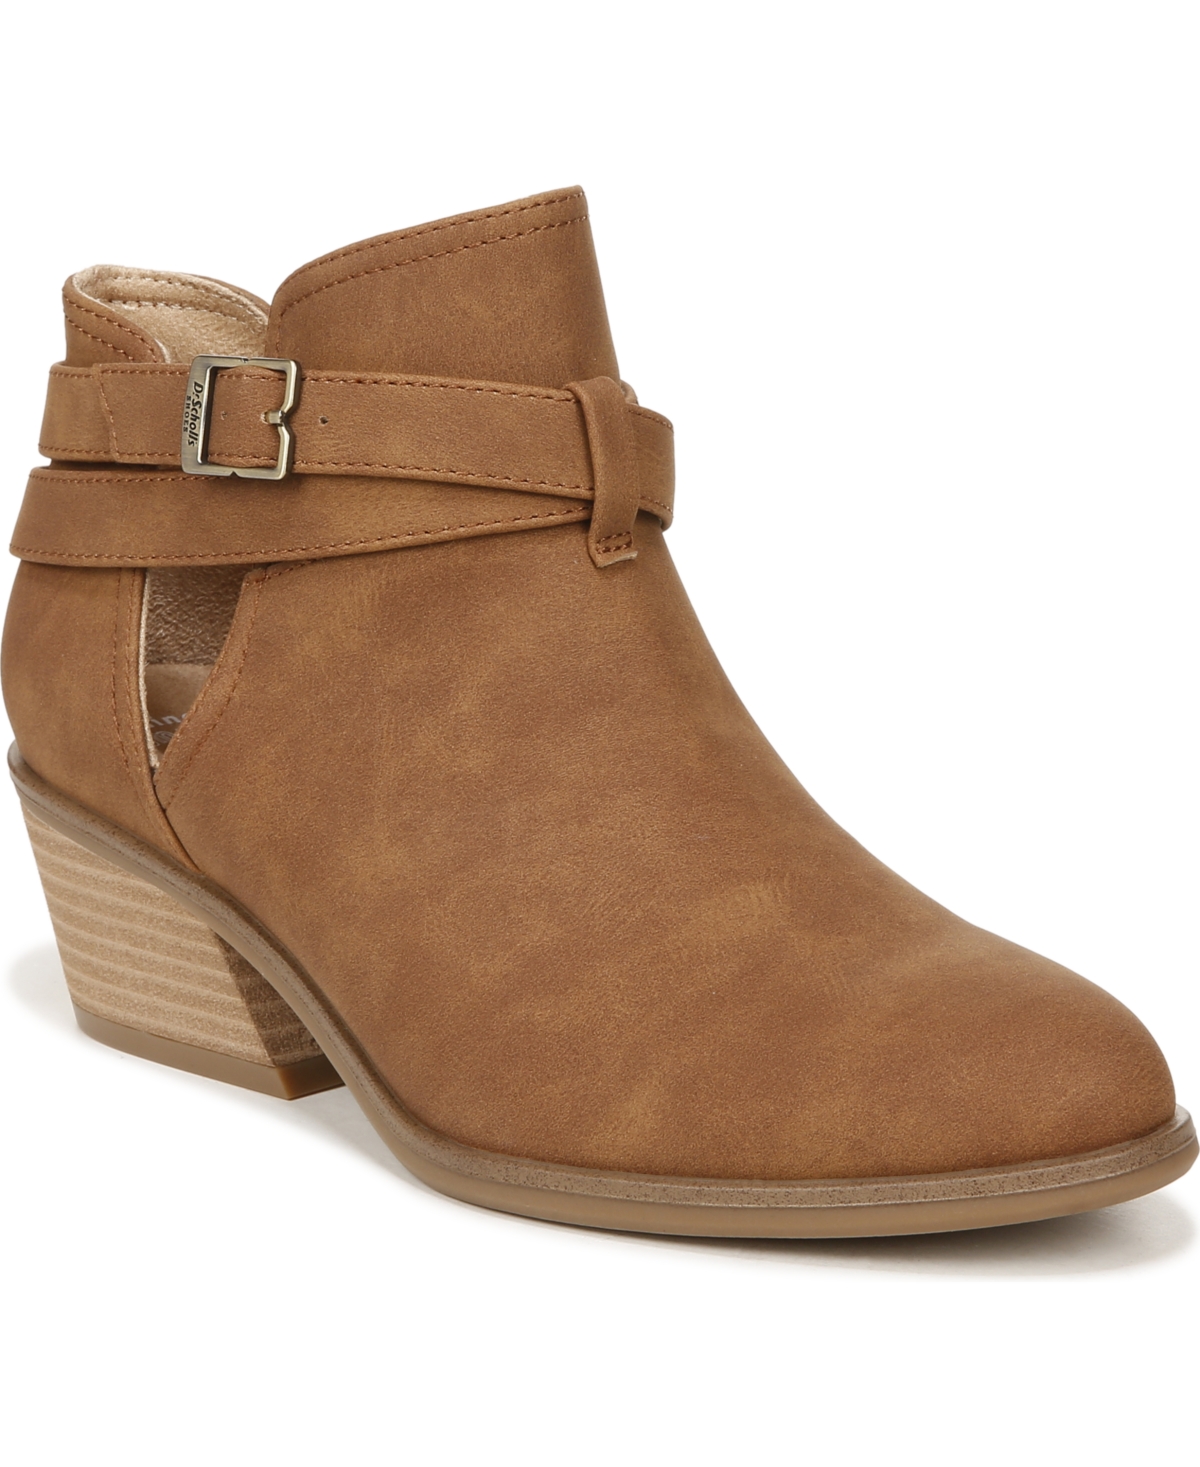 Dr. Scholl's Women's Literally Booties In Honey Brown Faux Leather